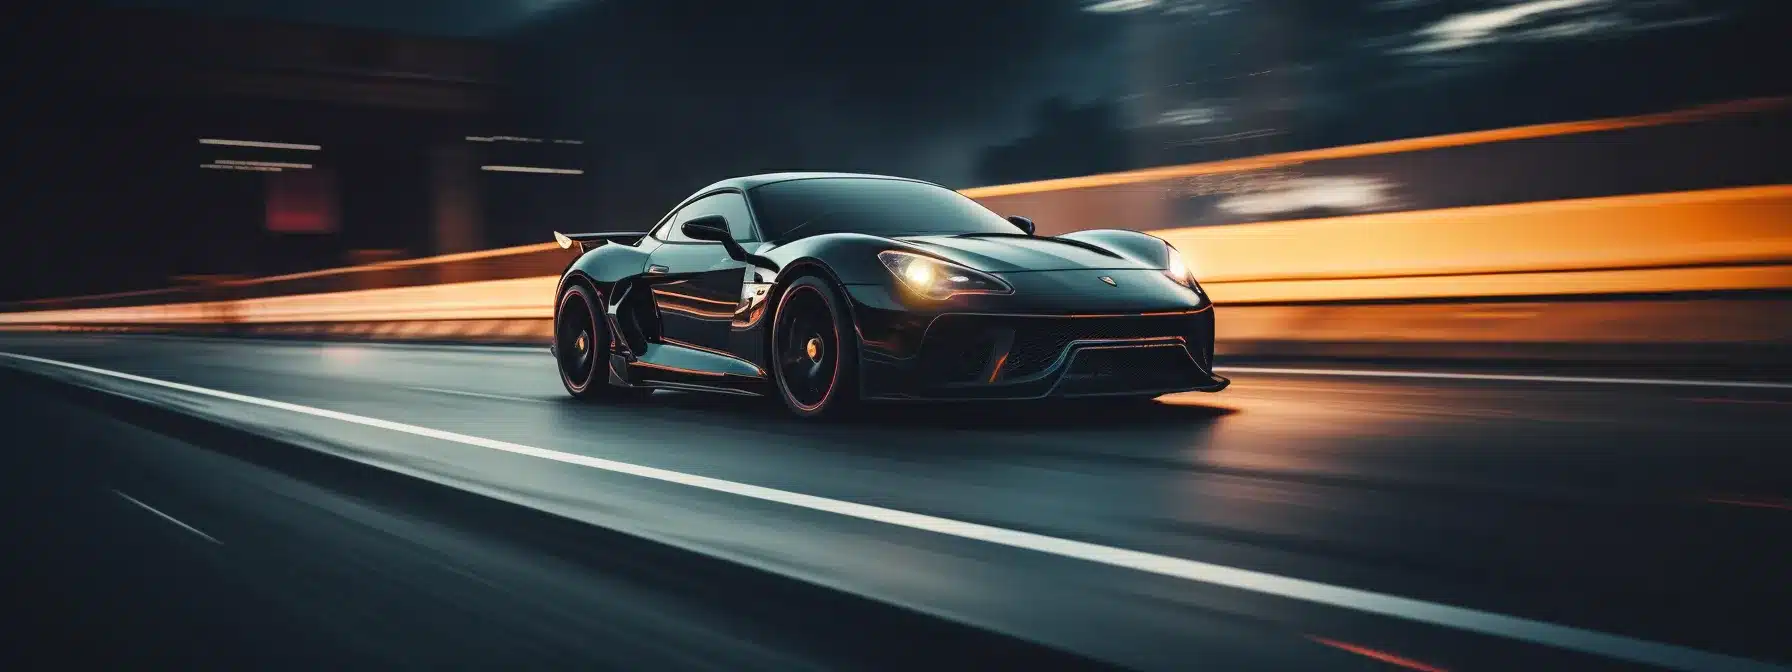 A Sleek Sports Car Zooming Down A Highway.